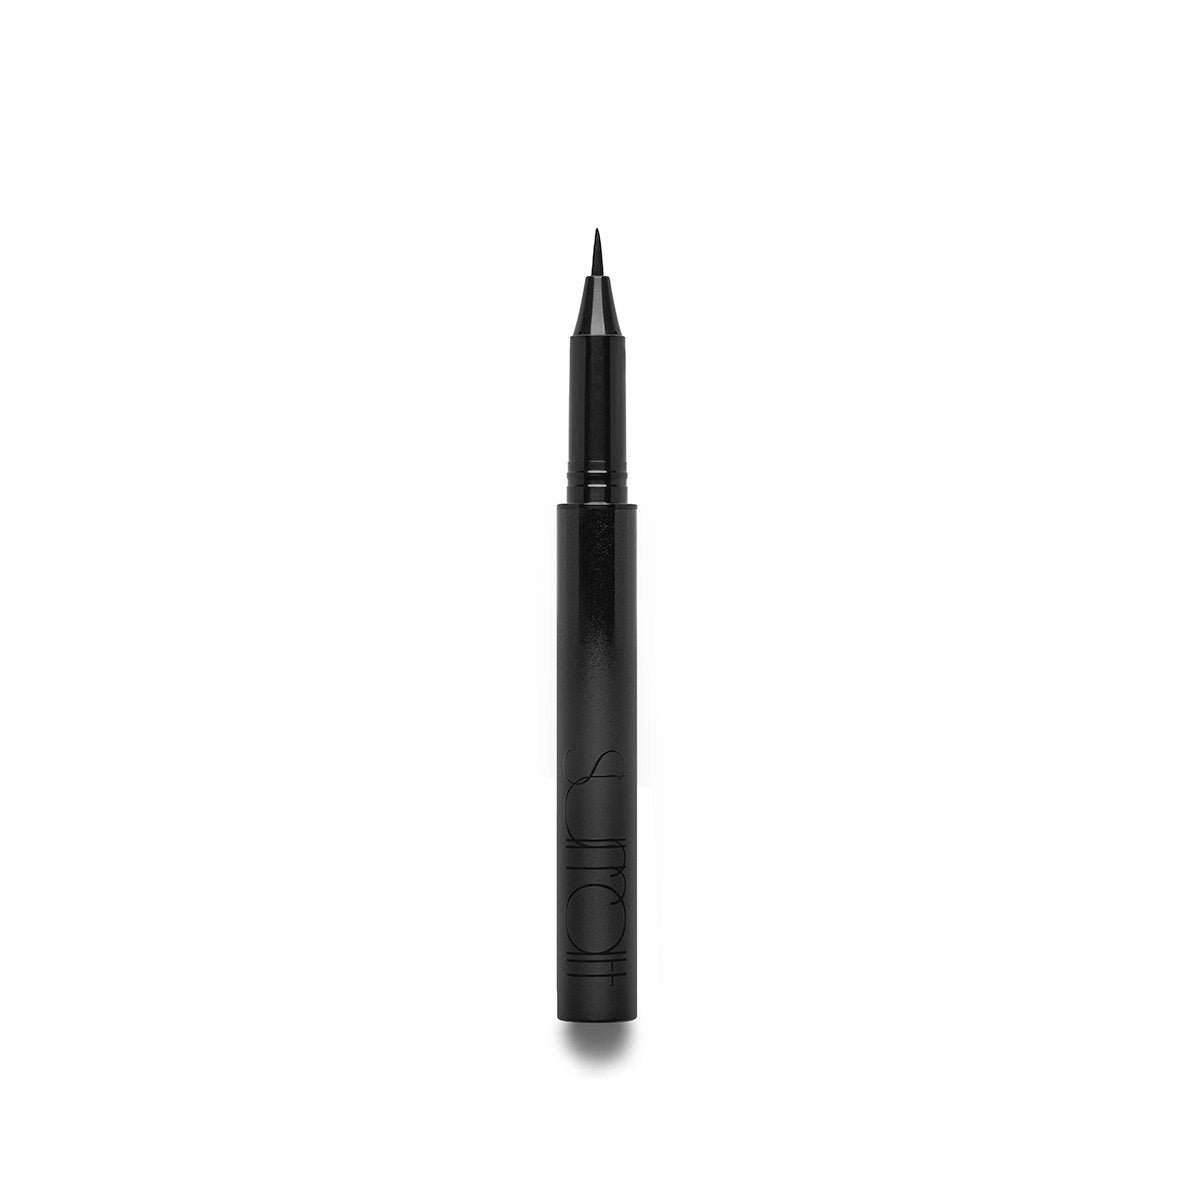 CHAT NOIR - INKY BLACK - liquid eyeliner with calligraphy-inspired brush in inky black shade